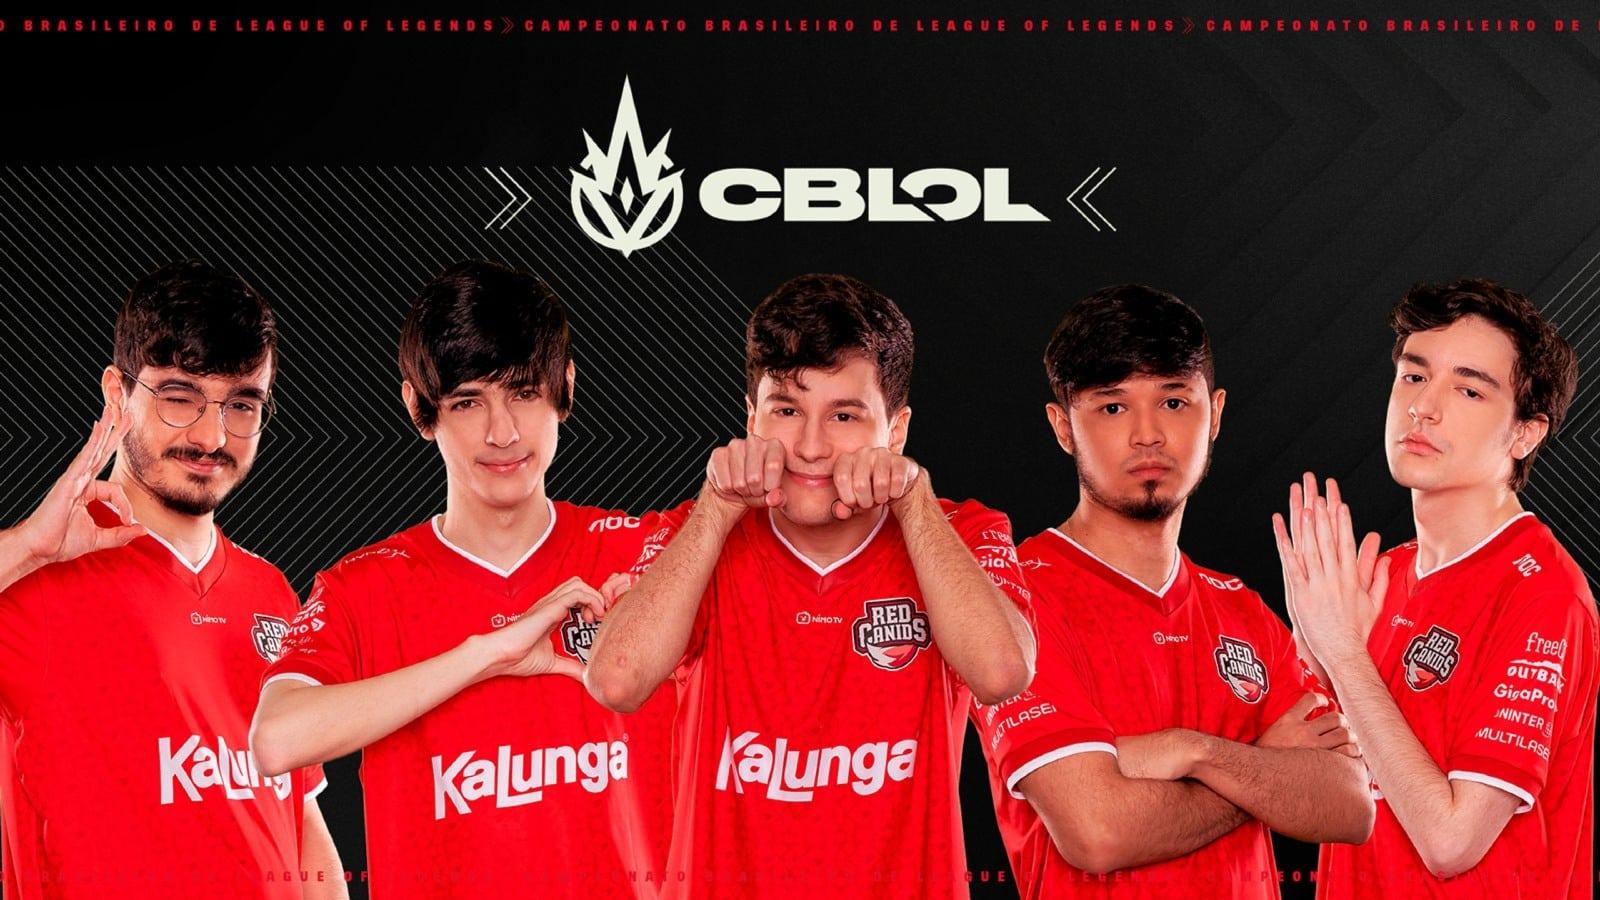 RED Canids CBLOL 2021